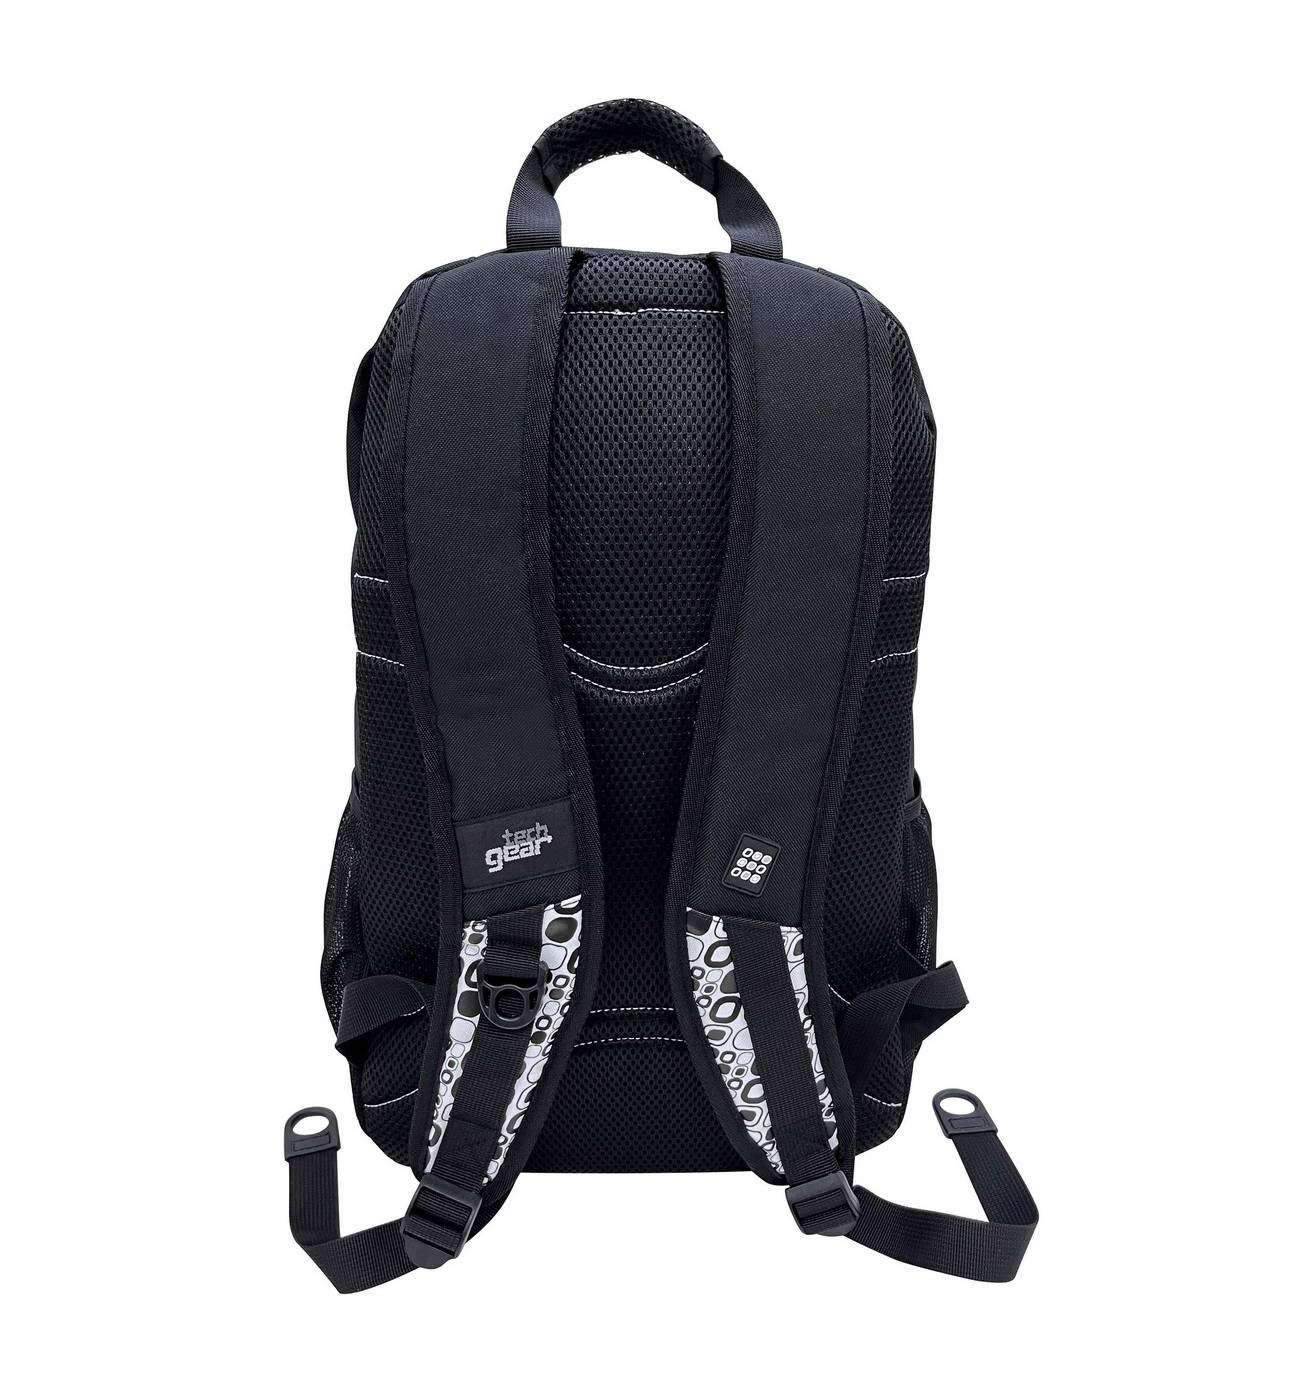 Tech Gear Park Central Backpack - Black; image 2 of 3